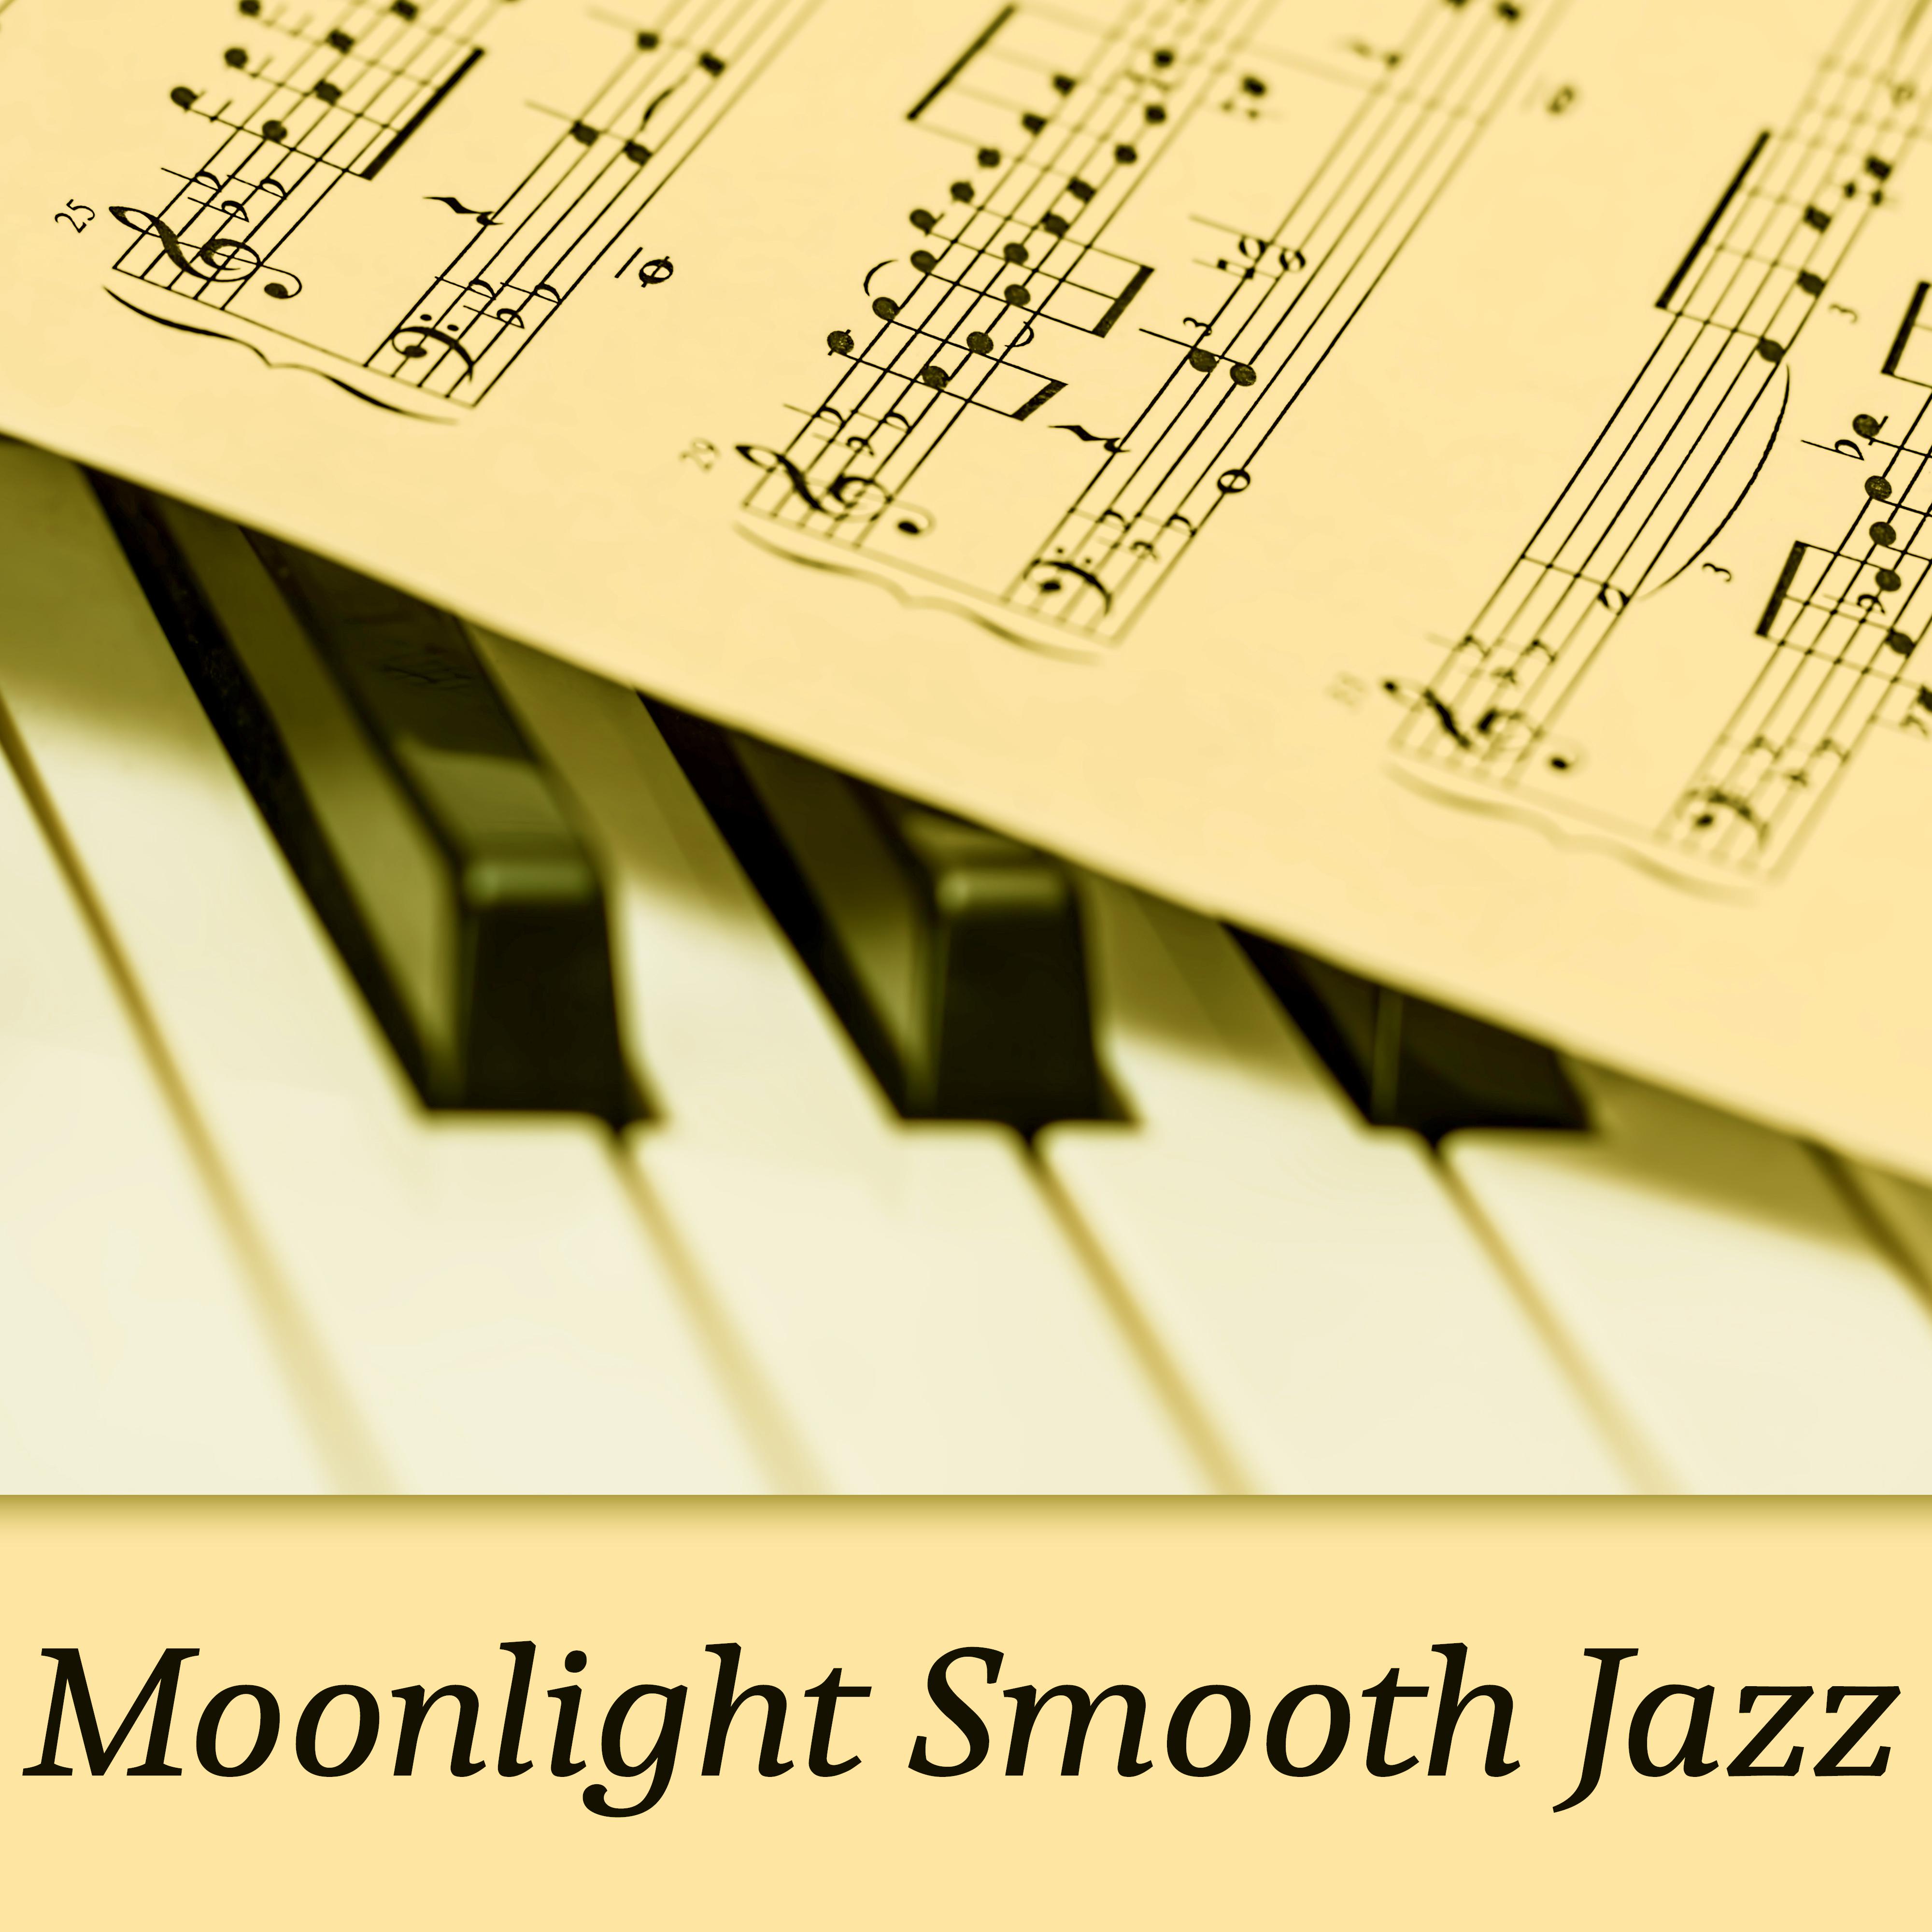 Moonlight Smooth Jazz – Relaxing Jazz, Jazz by Night, Soft Piano Bar, Jazz for Relaxation